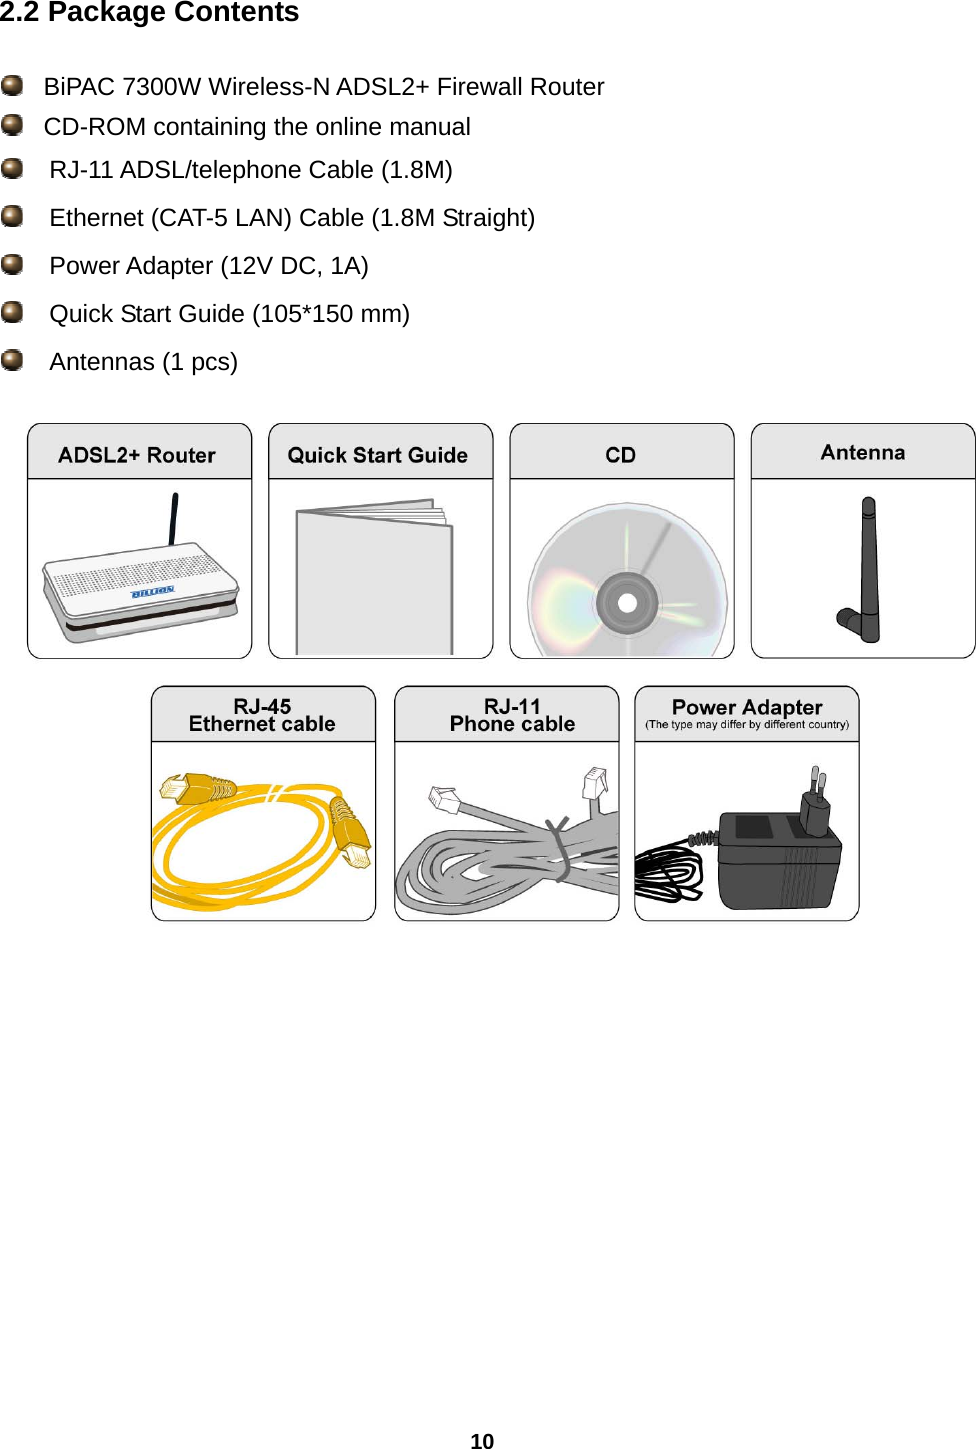 10 2.2 Package Contents    BiPAC 7300W Wireless-N ADSL2+ Firewall Router    CD-ROM containing the online manual   RJ-11 ADSL/telephone Cable (1.8M)    Ethernet (CAT-5 LAN) Cable (1.8M Straight)   Power Adapter (12V DC, 1A)   Quick Start Guide (105*150 mm)     Antennas (1 pcs)            